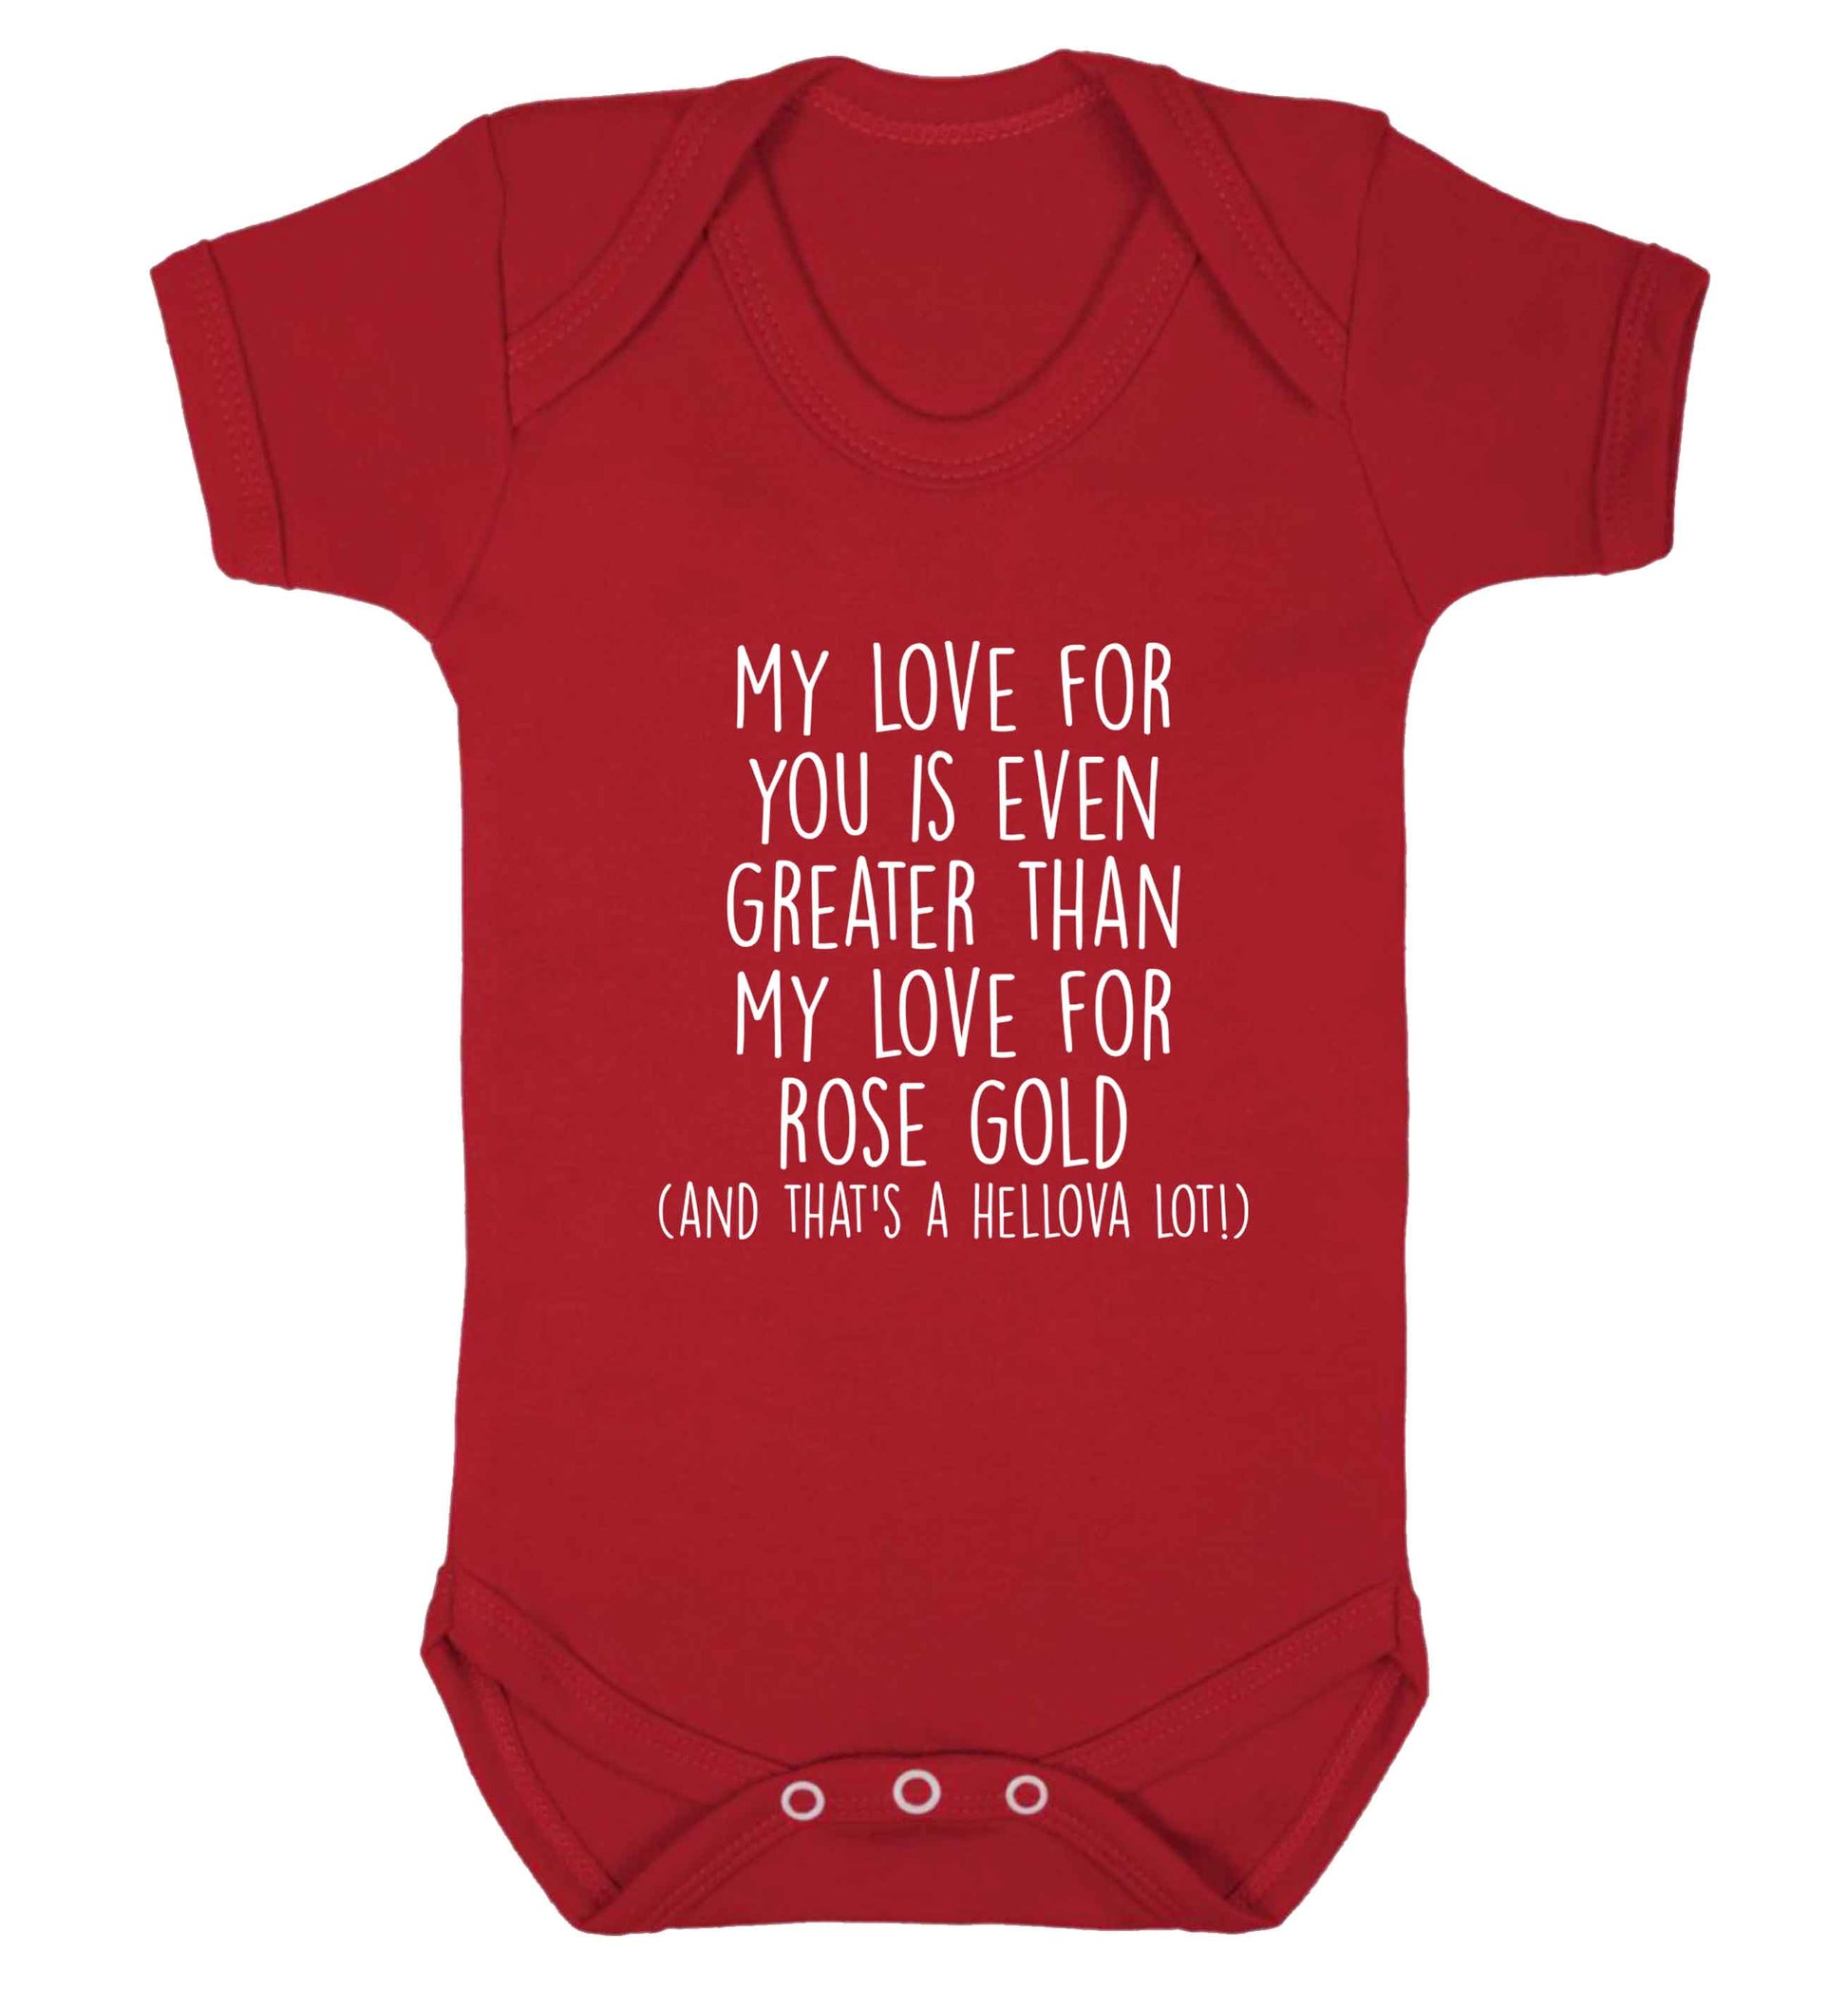 My love for you is even greater than my love for rose gold (and that's a hellova lot) baby vest red 18-24 months